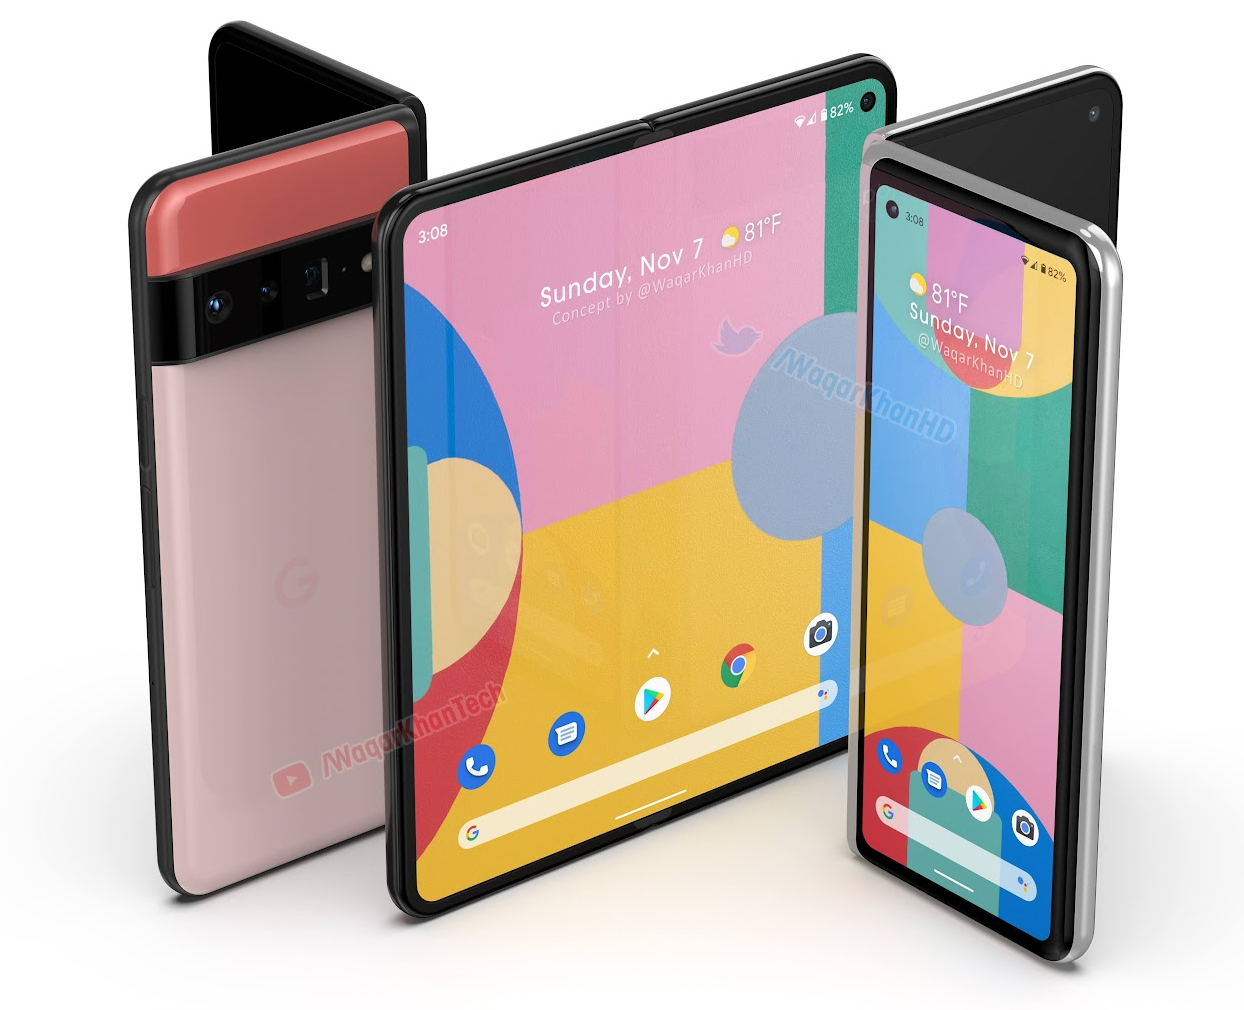  The image shows three Google Pixel 9 Pro Fold smartphones with different color finishes.